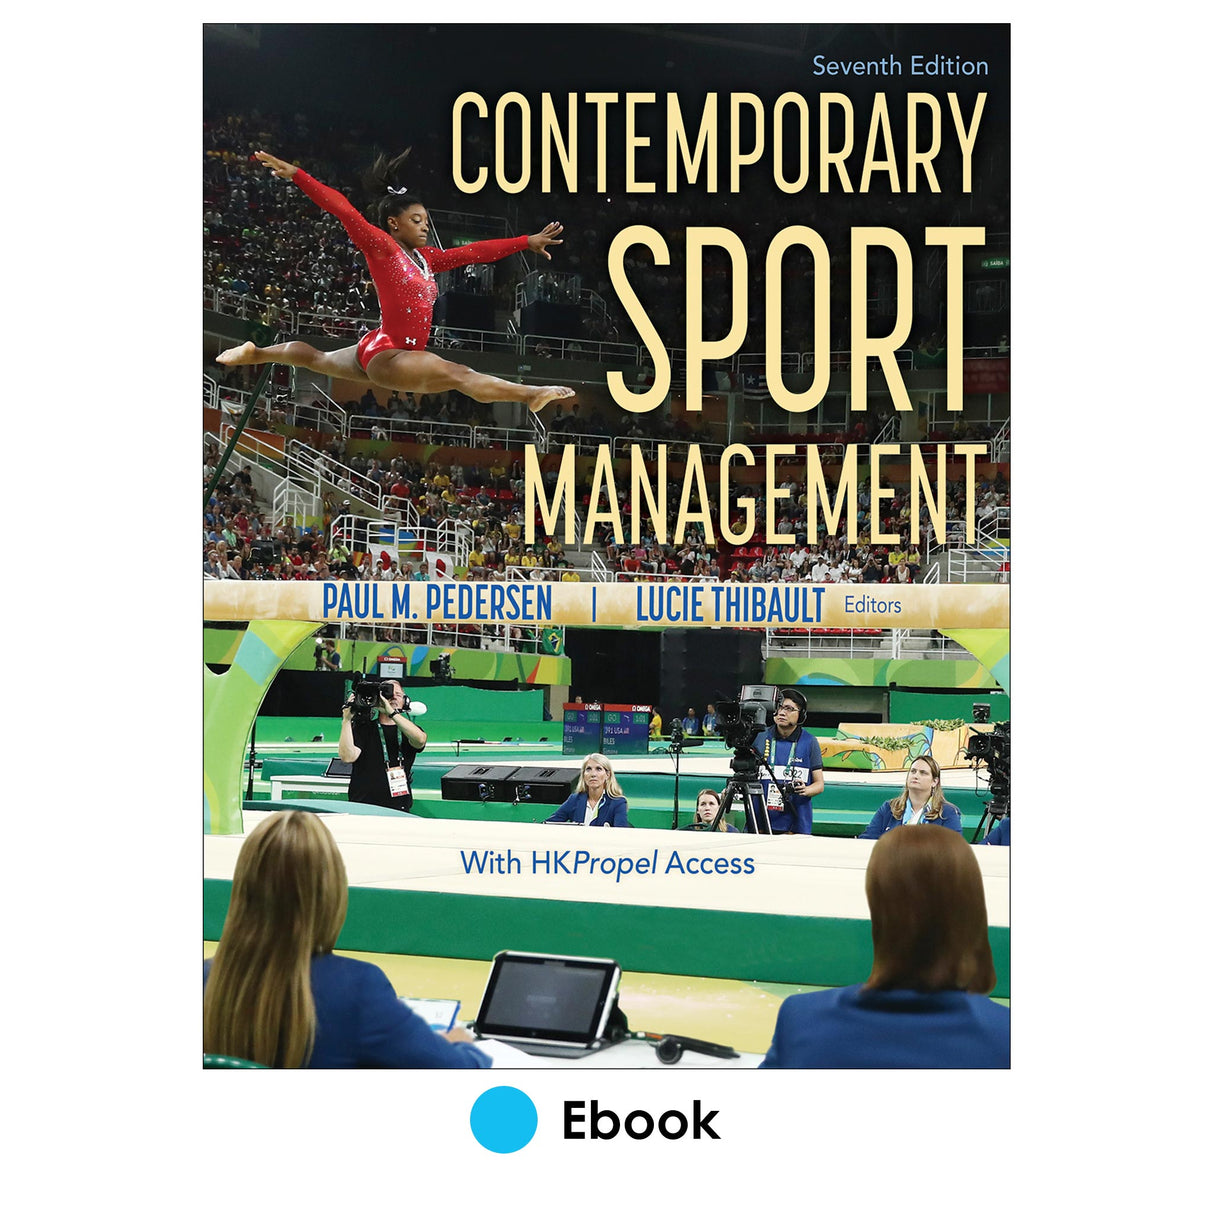 Contemporary Sport Management 7th Edition Ebook With HKPropel Access